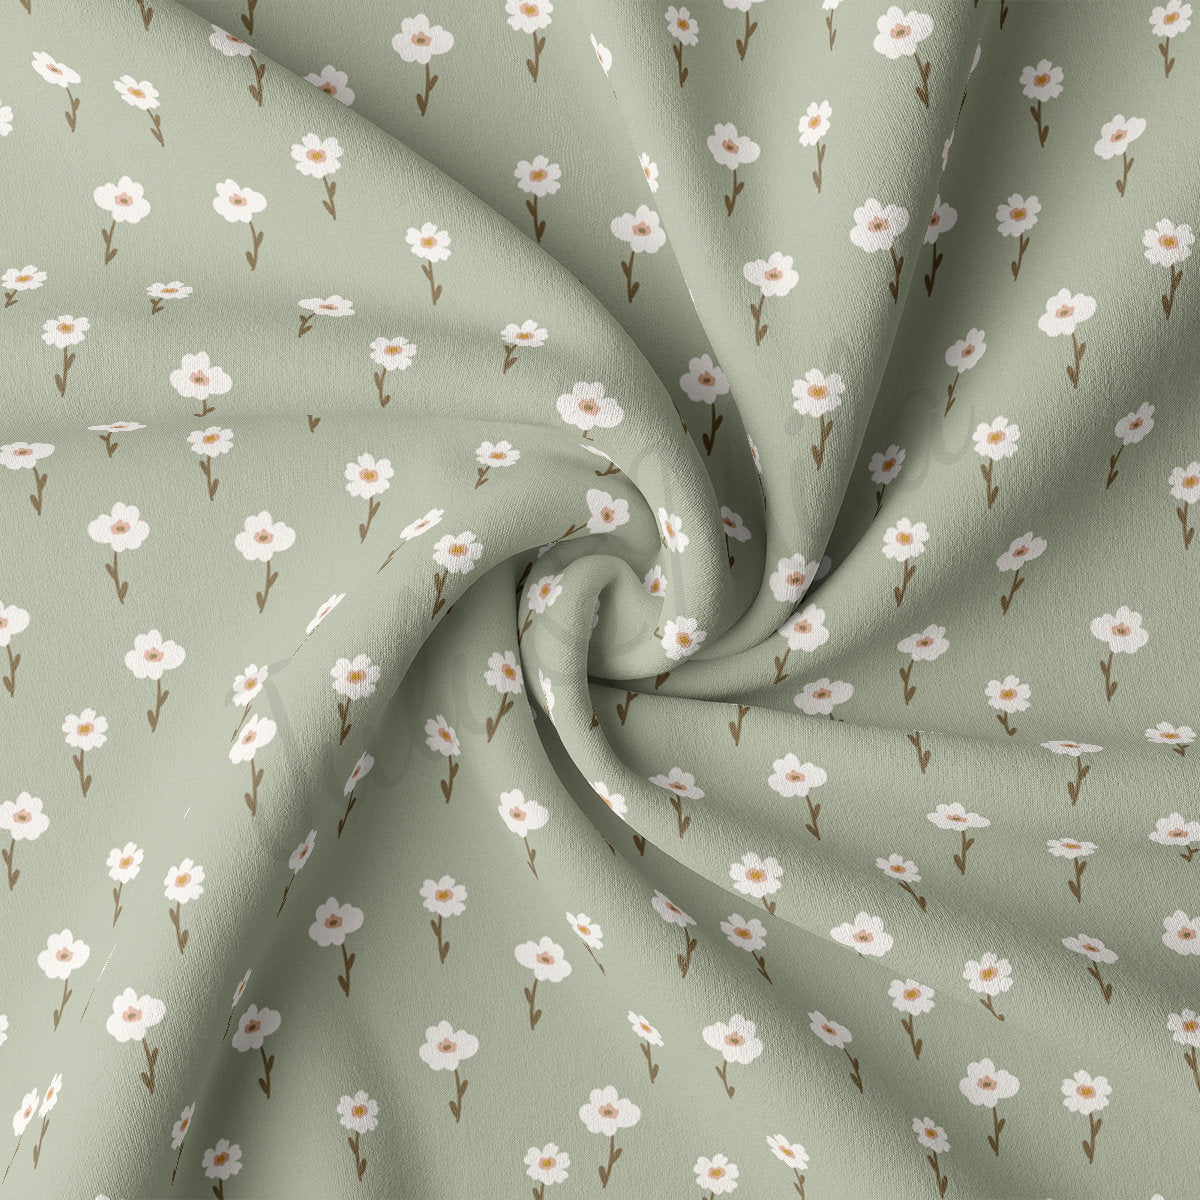 Floral DBP Fabric Double Brushed Polyester Fabric by the Yard DBP Jersey Stretchy Soft Polyester Stretch Fabric DBP2183